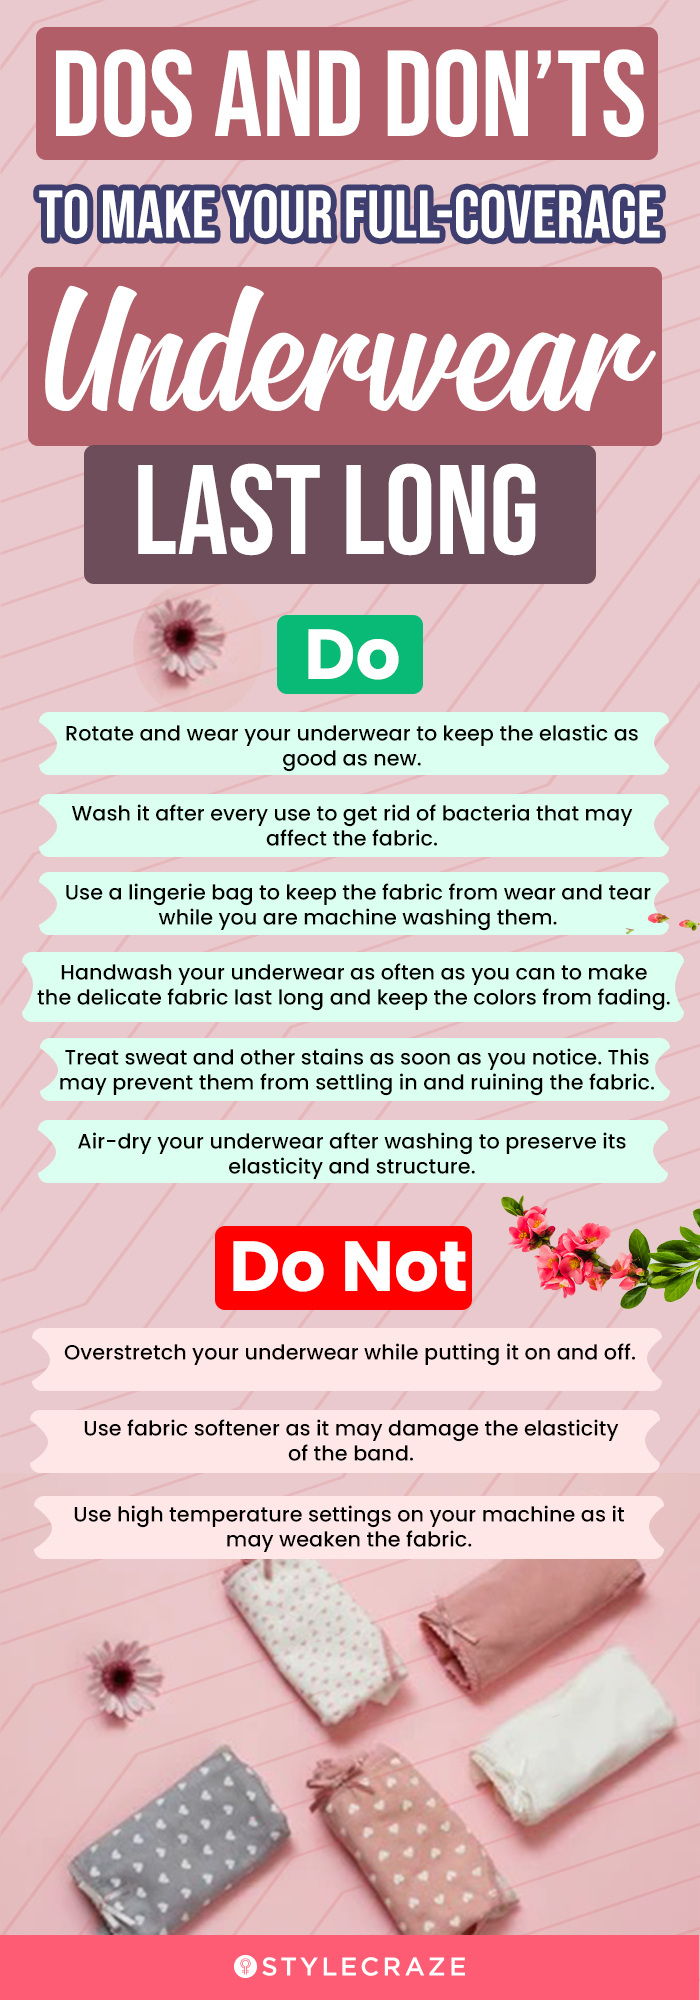 Dos And Don’ts To Make Your Full-Coverage Underwear Last Long (infographic)